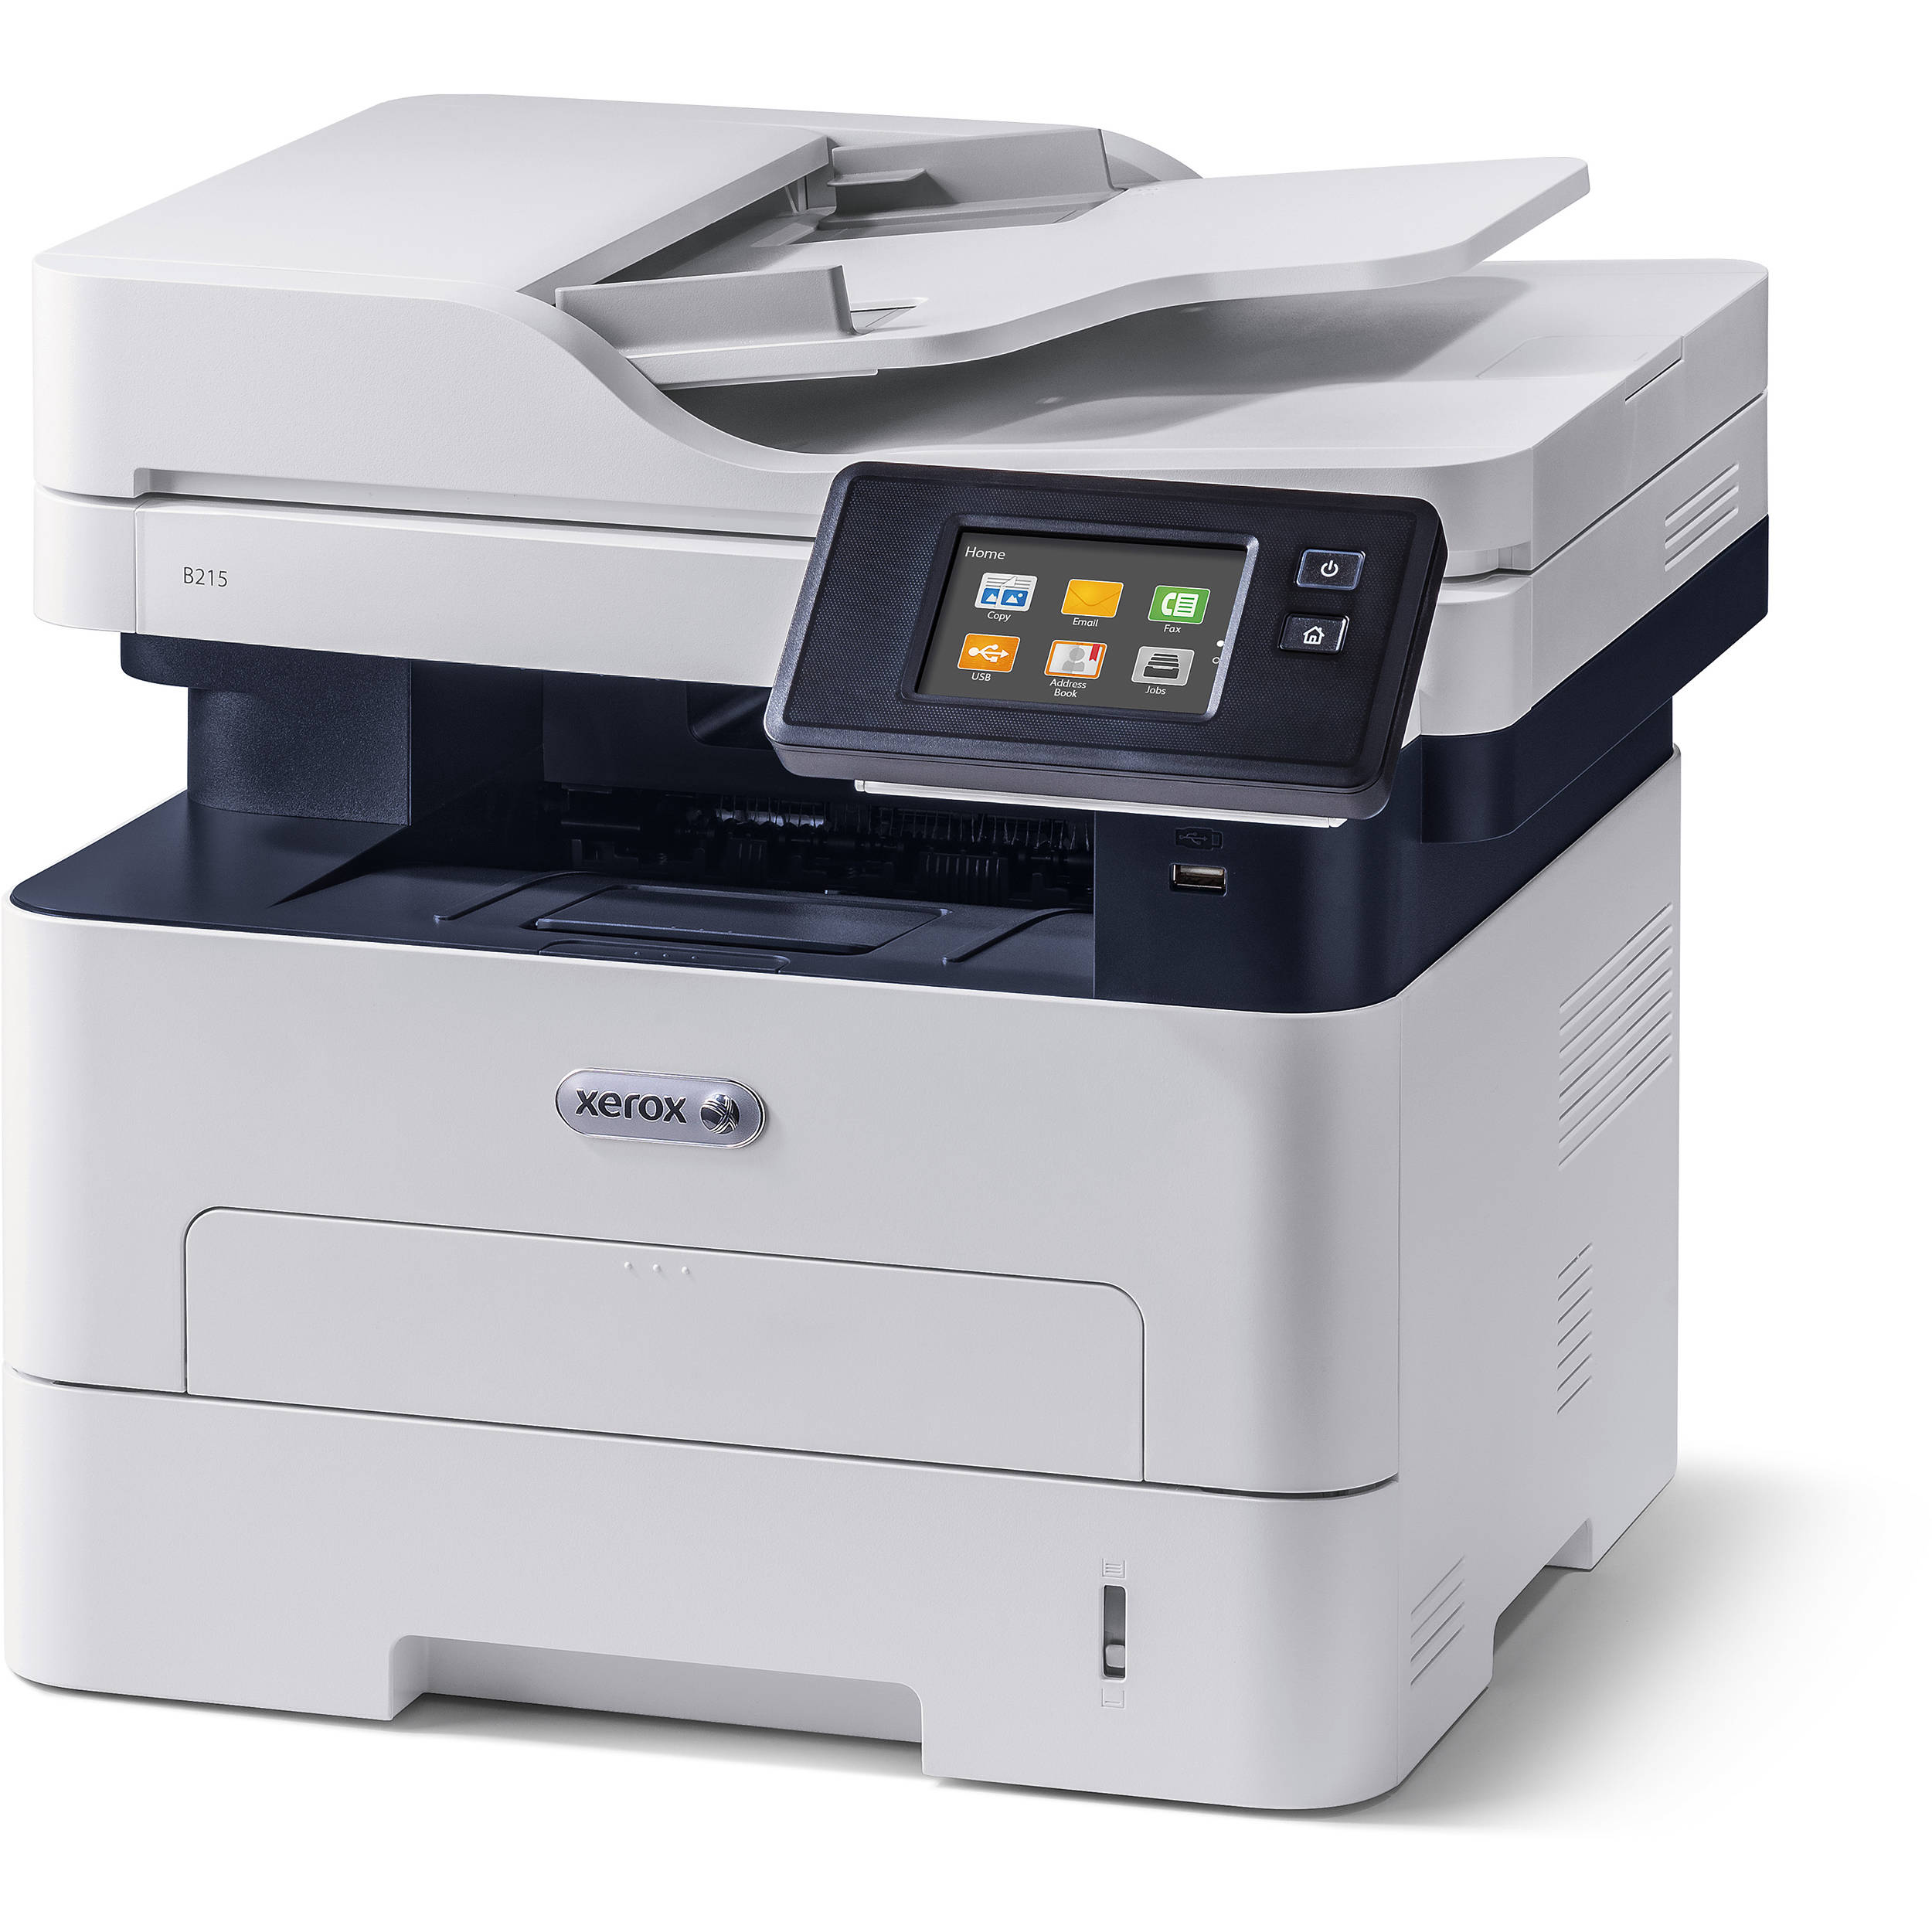 You are currently viewing Xerox B215